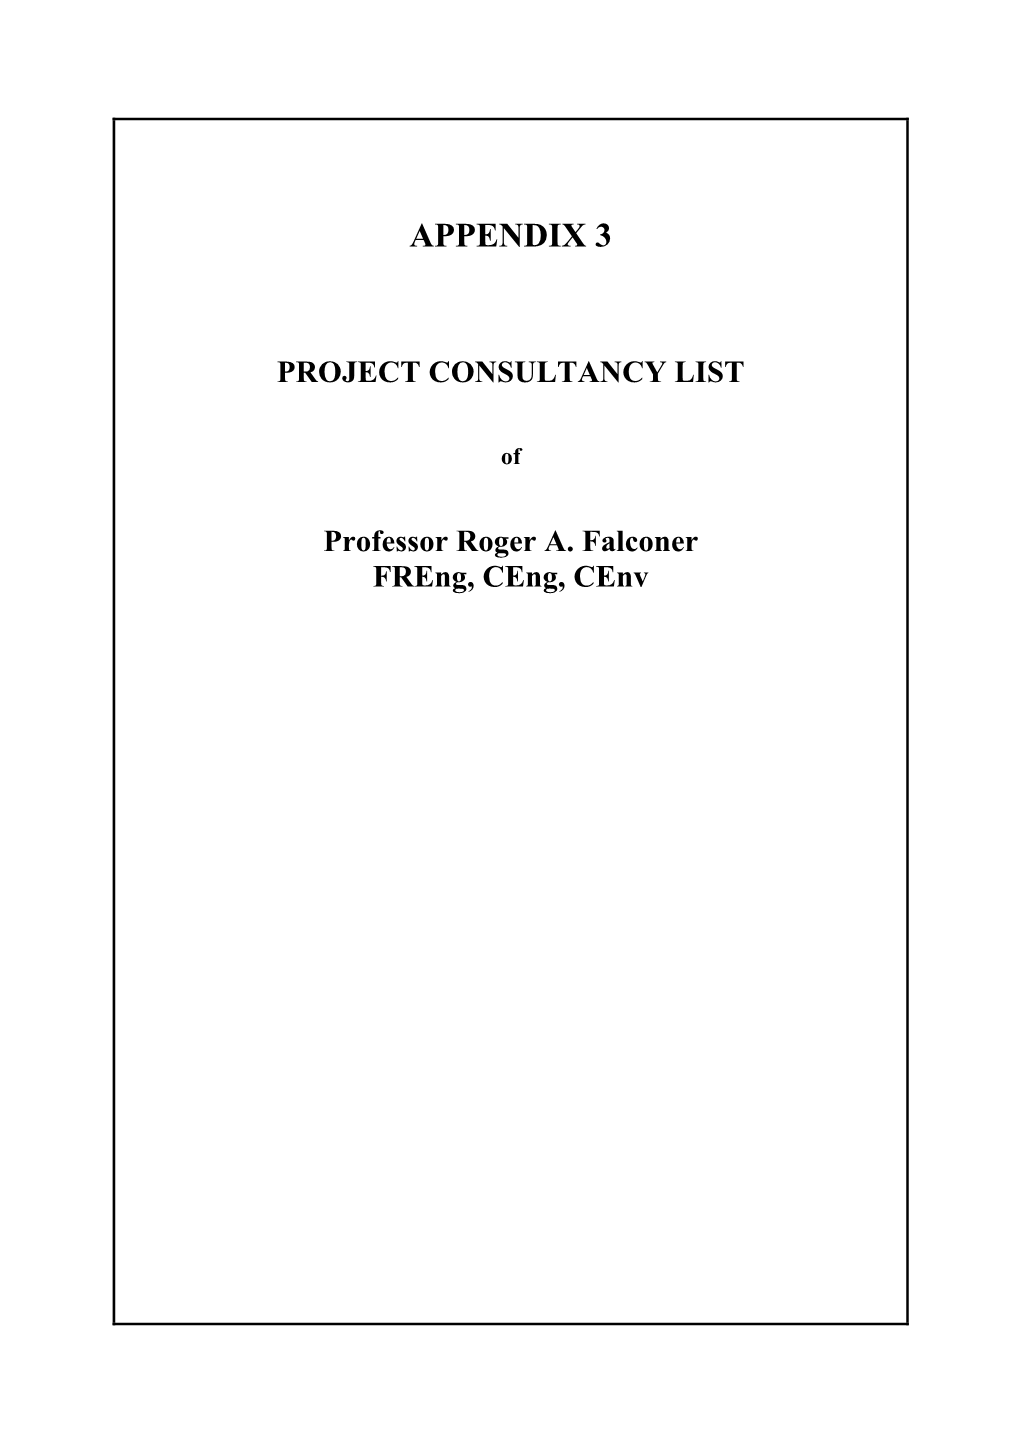 Project Consultancy List